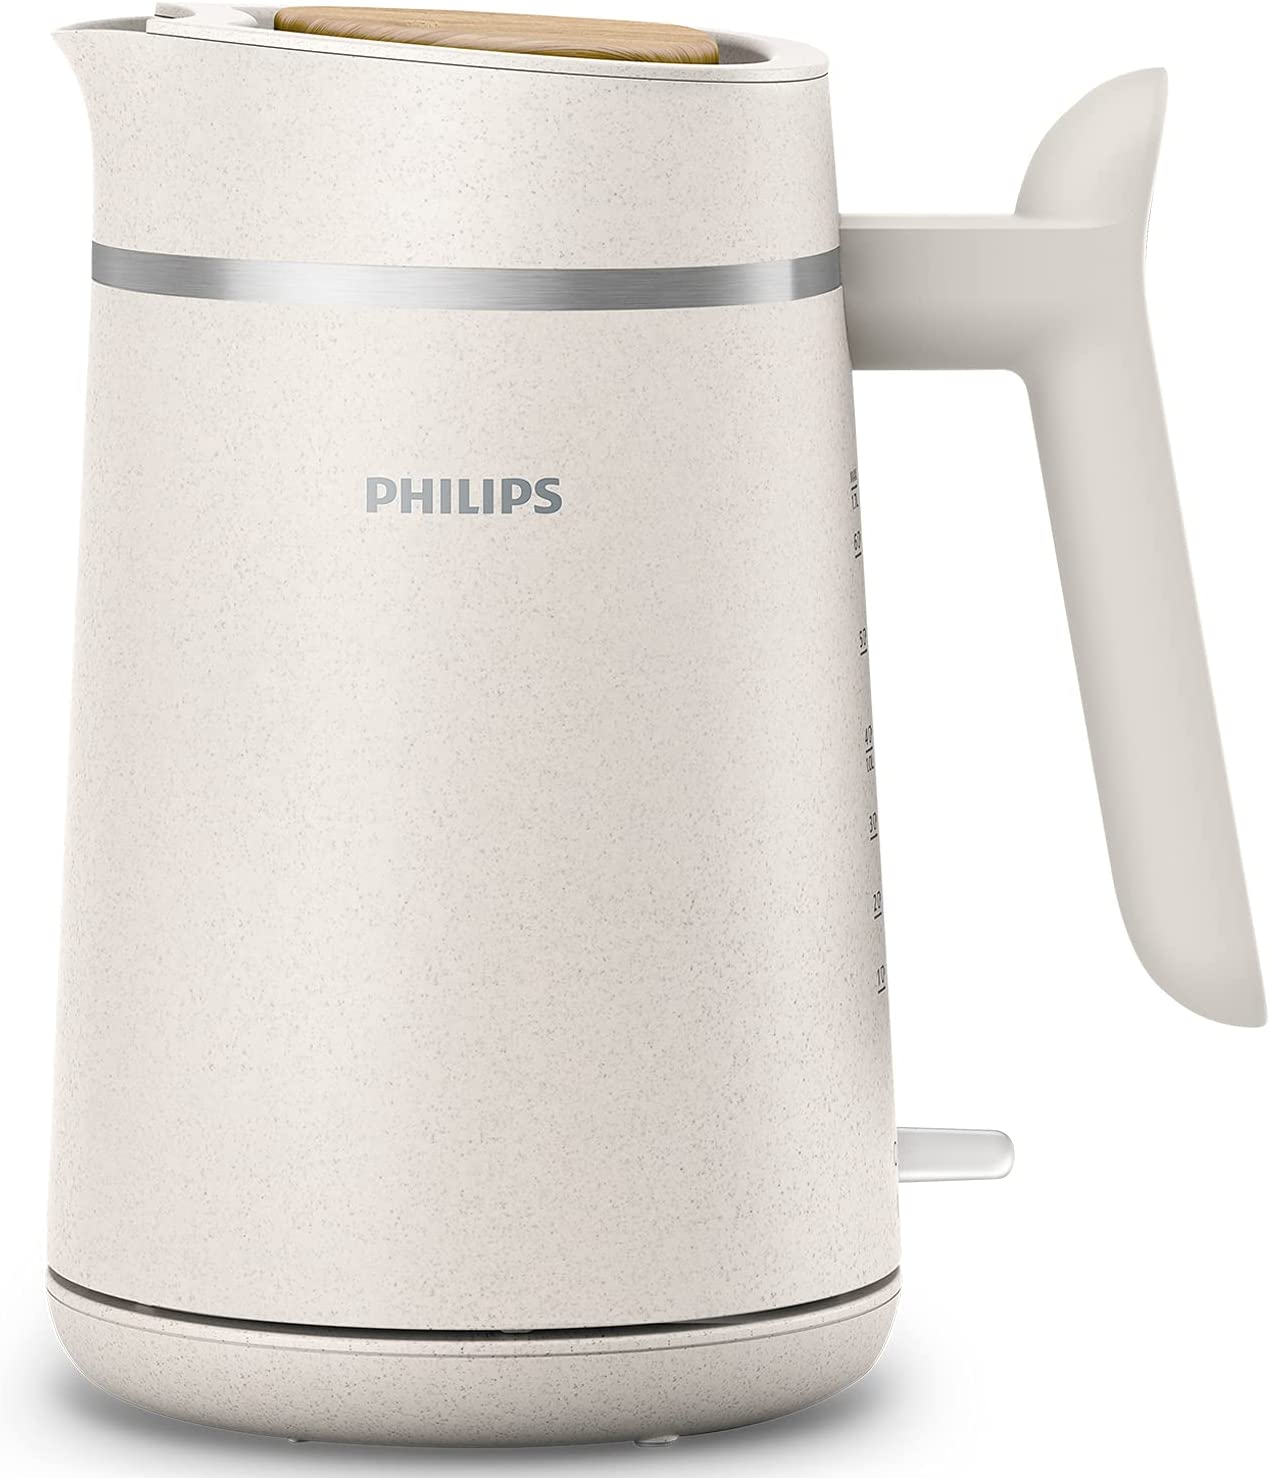 Philips Domestic Appliances Philips Sustainable Breakfast Set Made From Organic, 100% Recycled Plastic - Coffee Machine + Kettle + Toaster, Conscious Collection